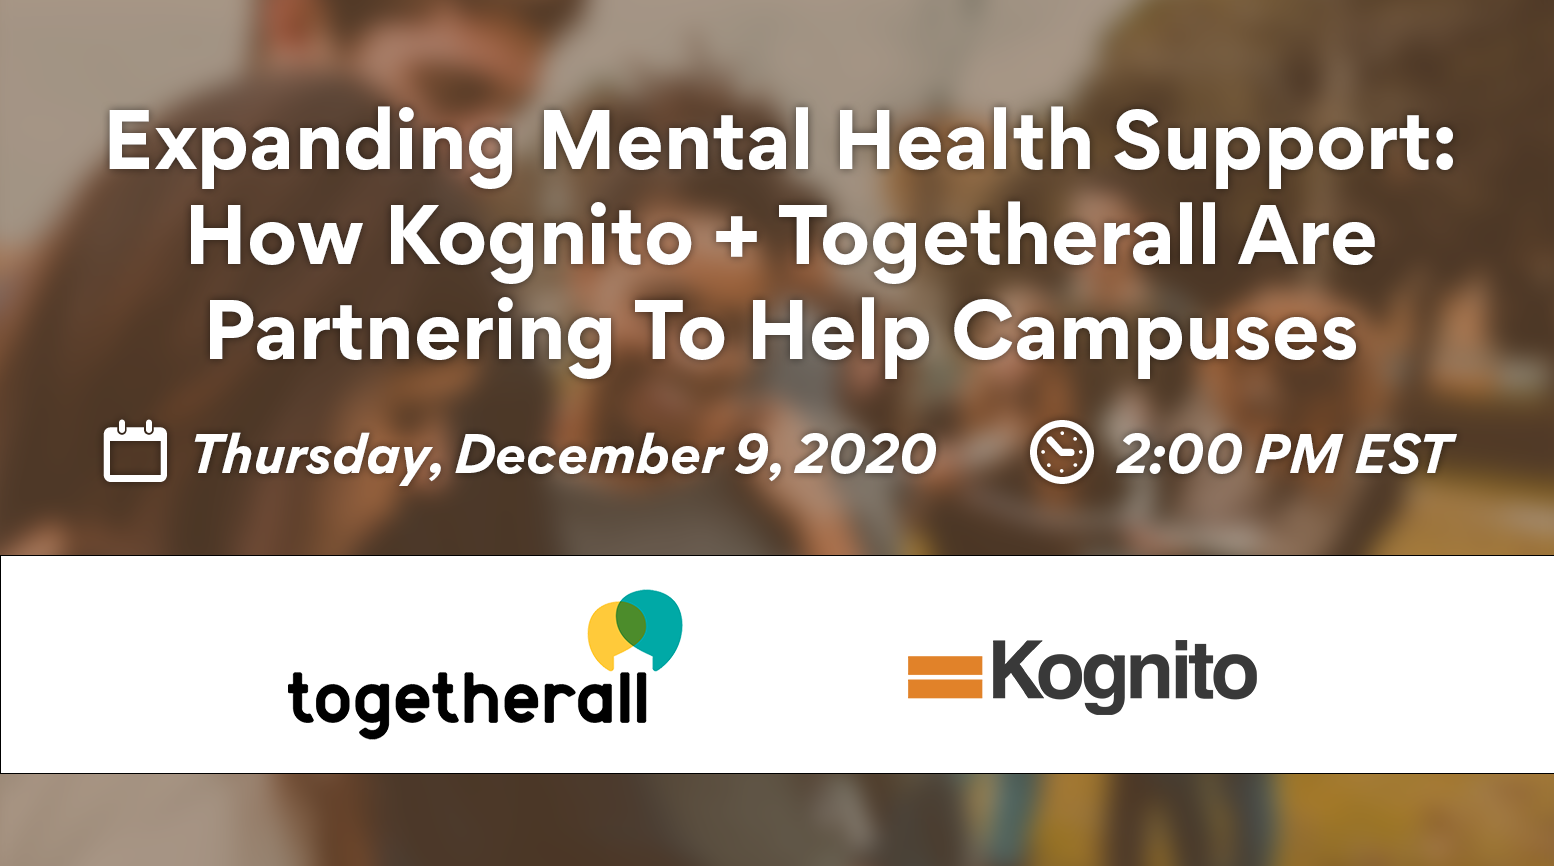 Expanding Mental Health Support: How Kognito + Togetherall Are Partnering To Help Campuses